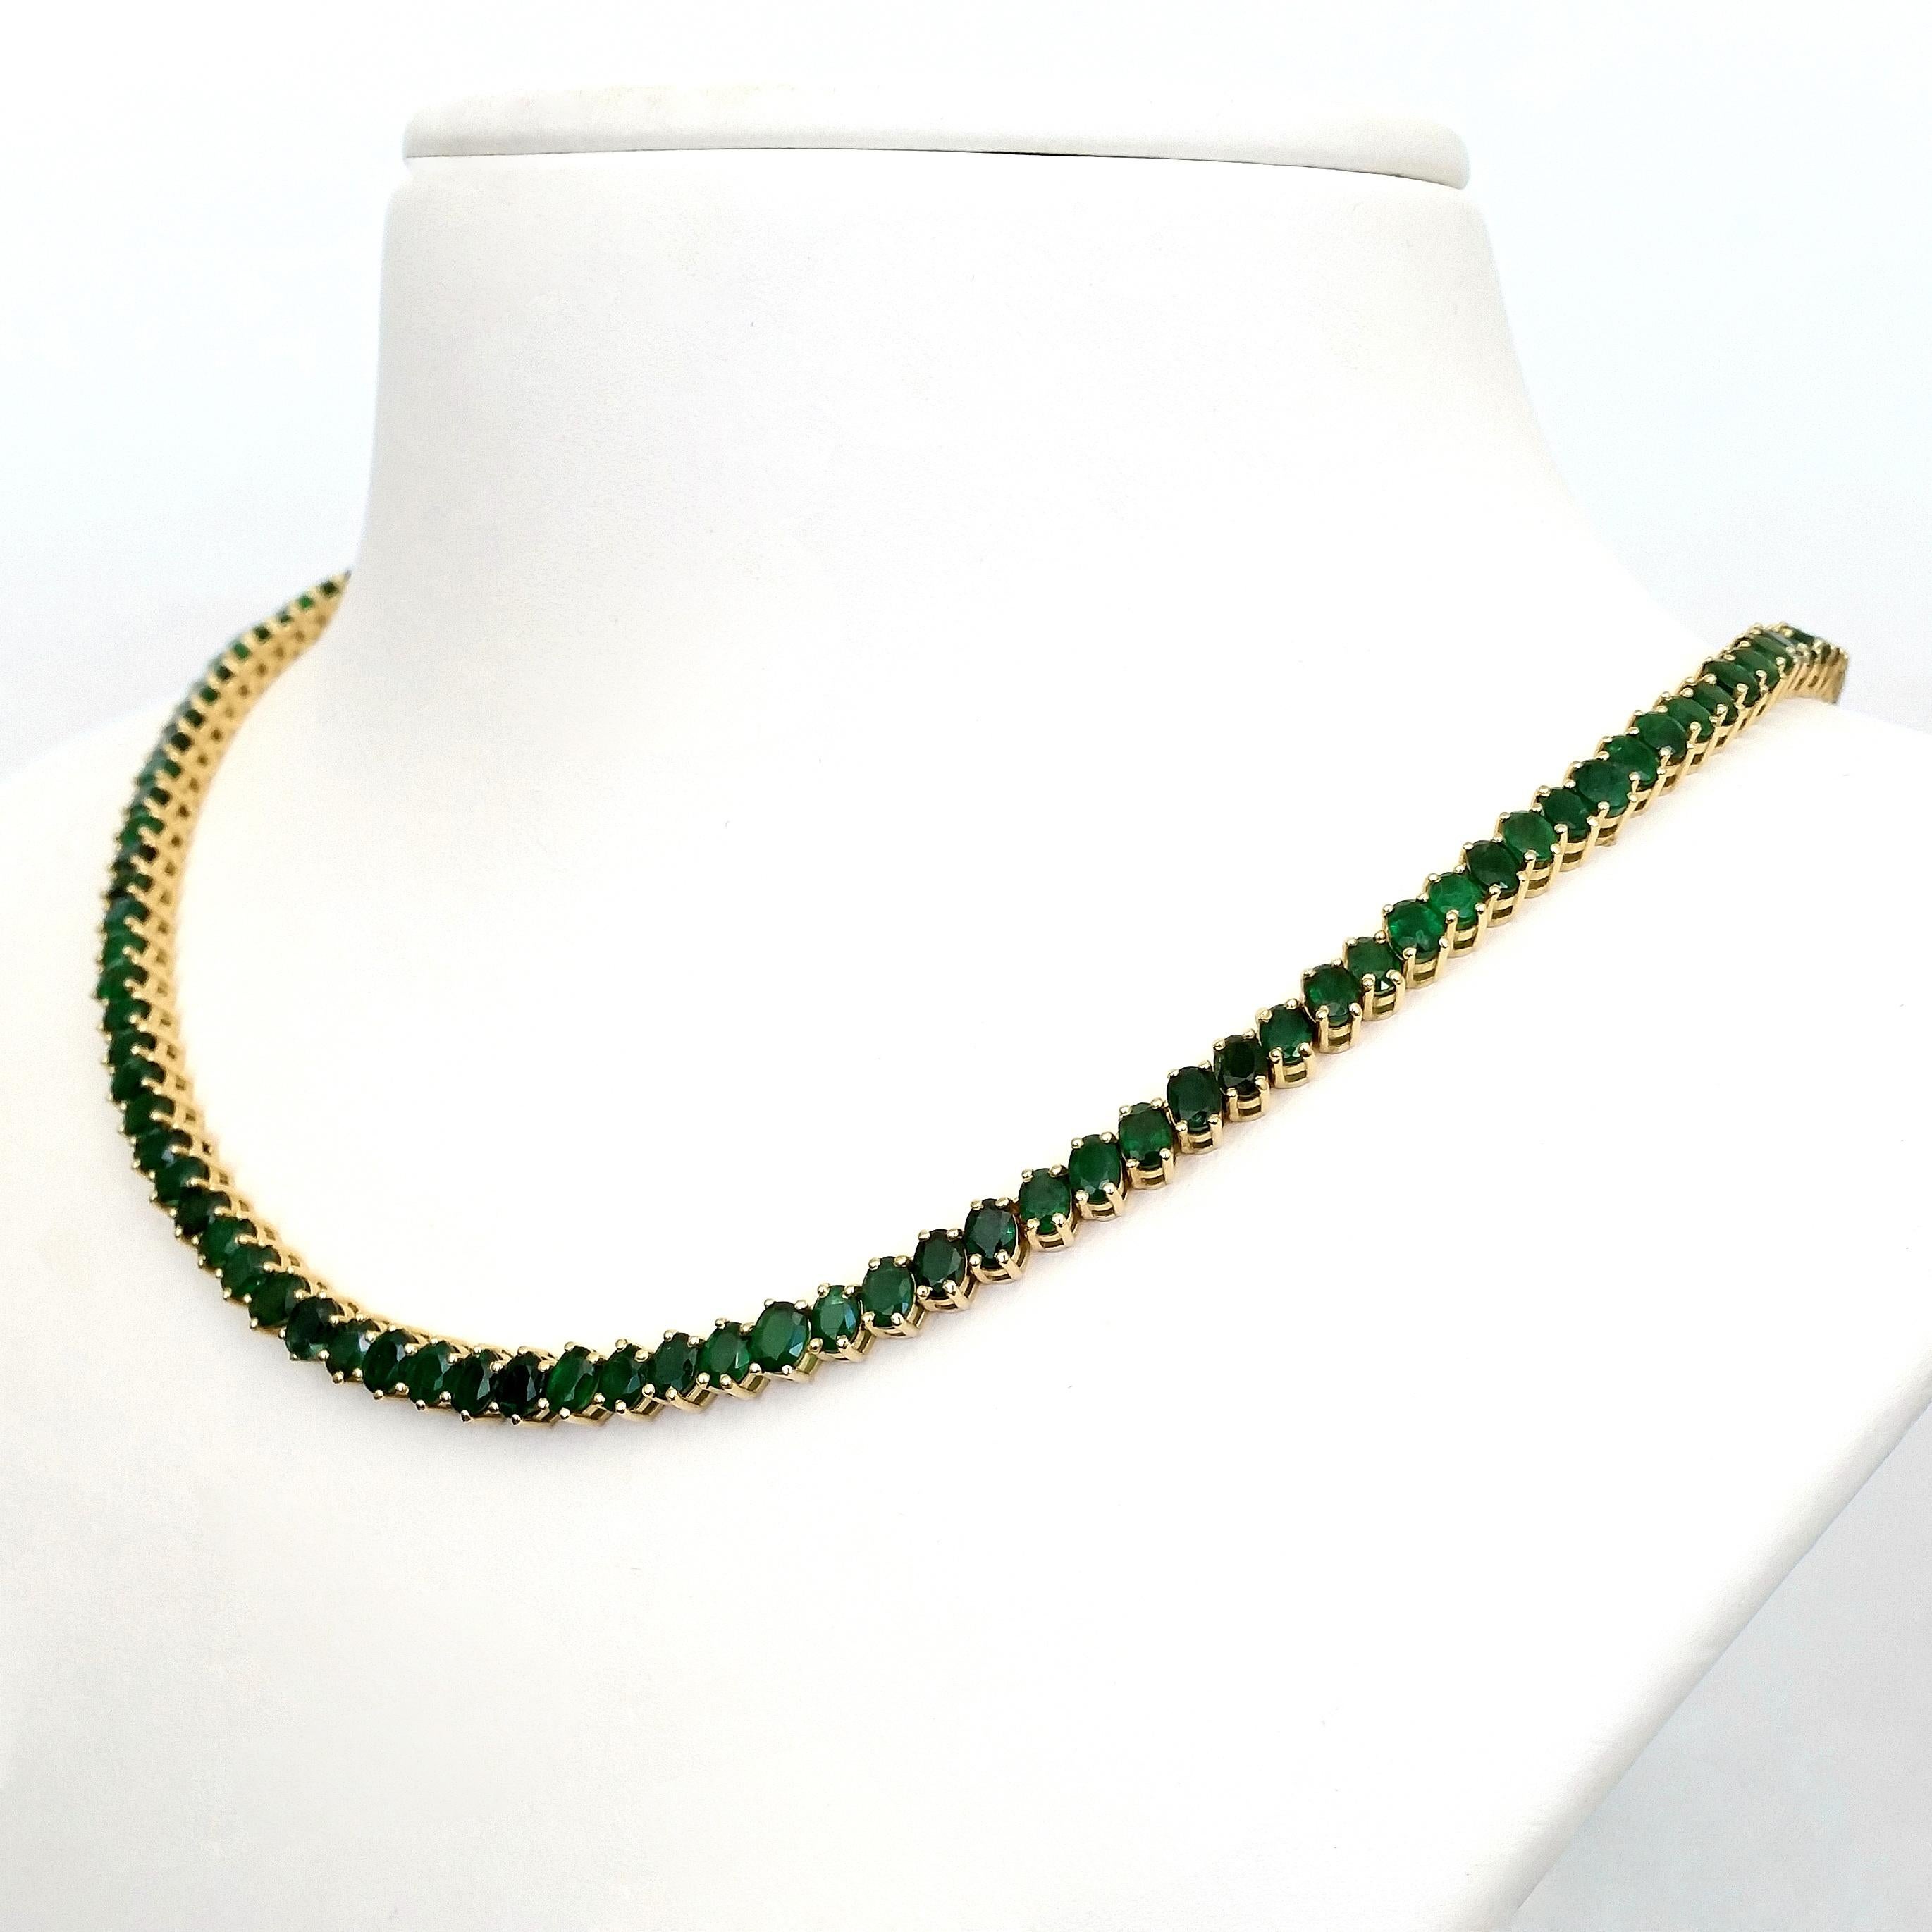 Emerald symbolizes truth and love and this elegant and attractive necklace will make you feel more loved and truthful. This uniquely designed 14kt yellow gold necklace, weighing 30.10 gr, showcases 134 oval mixed cut vivid green emeralds totaling